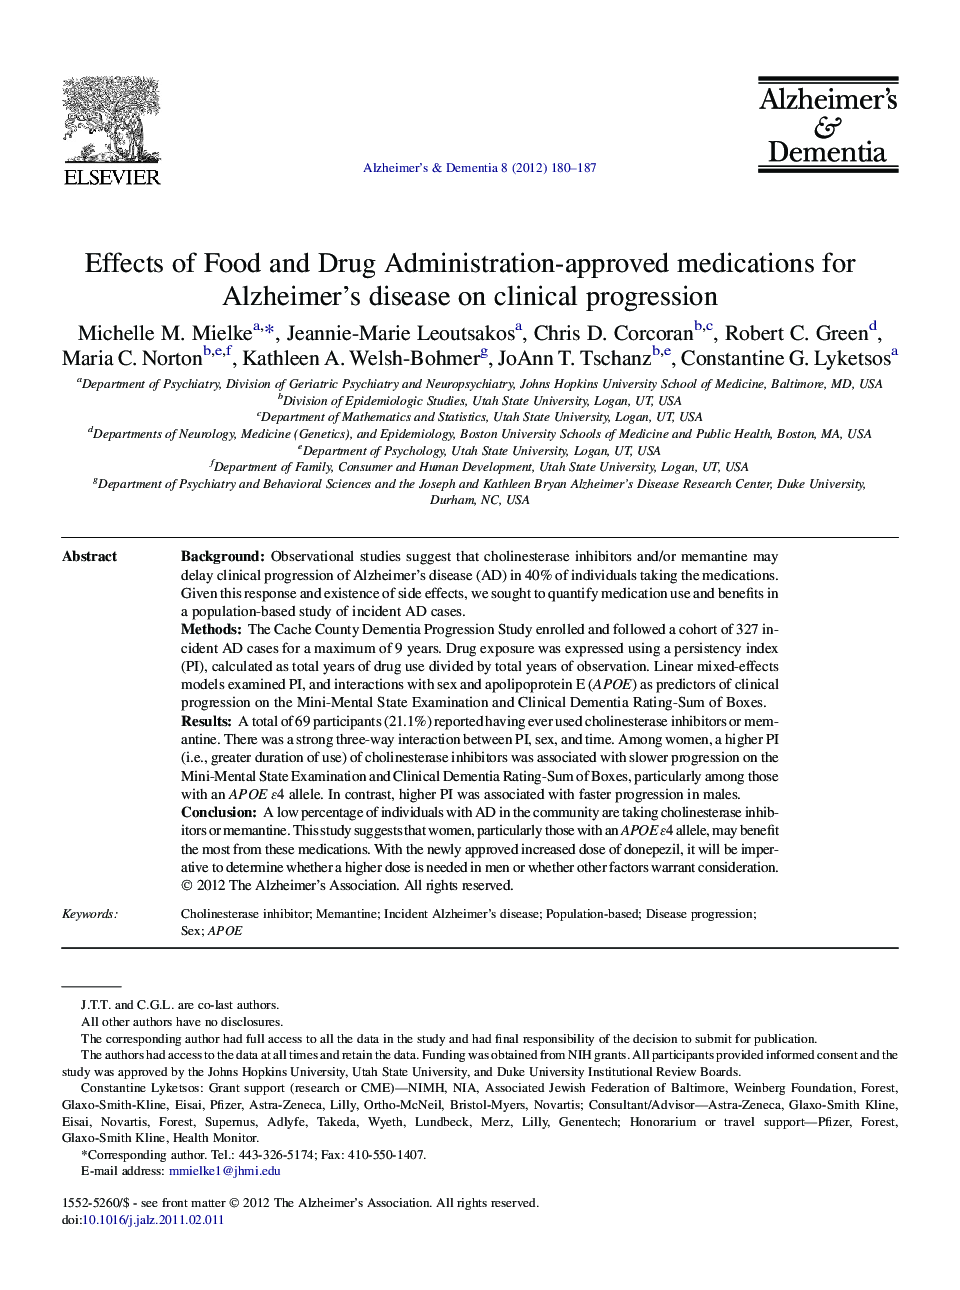 Effects of Food and Drug Administration-approved medications for Alzheimer's disease on clinical progression